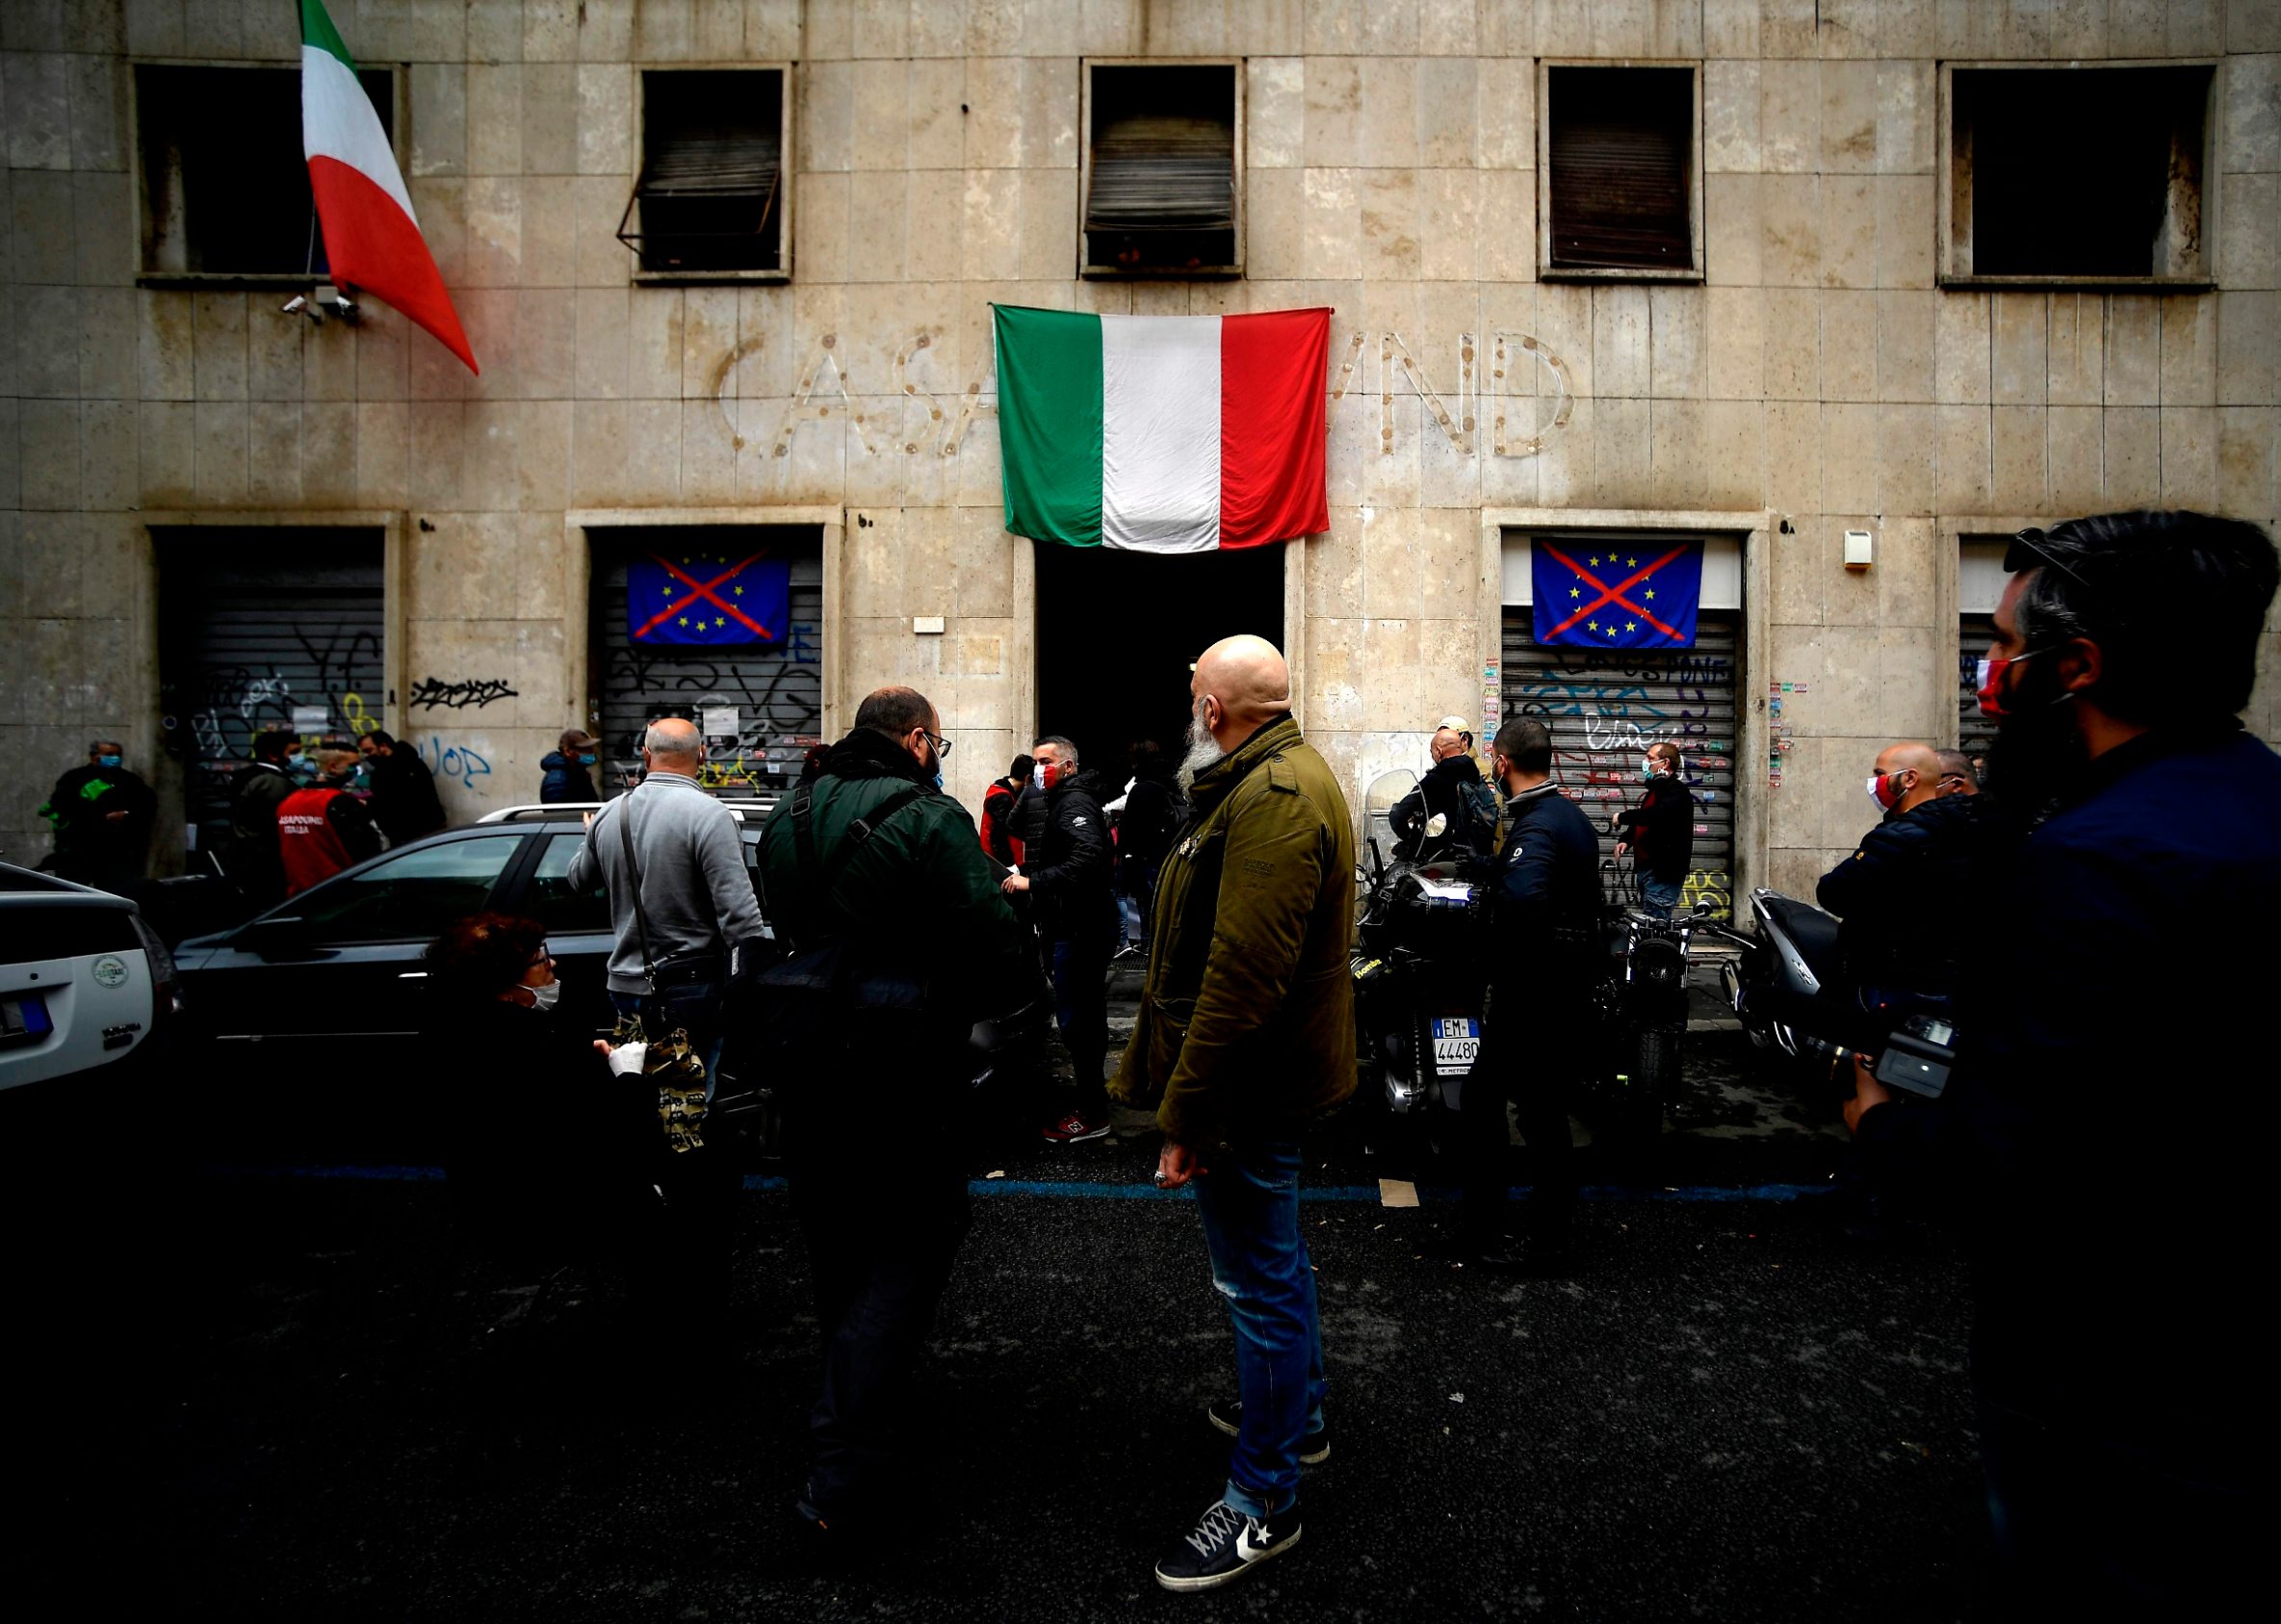 People wearing a face mask wait outside premises of Italian neo-fascist movement Casapound during a free distribution of food items on April 21, 2020 in Rome, during the lockdown aimed at curbing the spread of the COVID-19 infection, caused by the novel coronavirus. (Photo by Filippo MONTEFORTE / AFP)